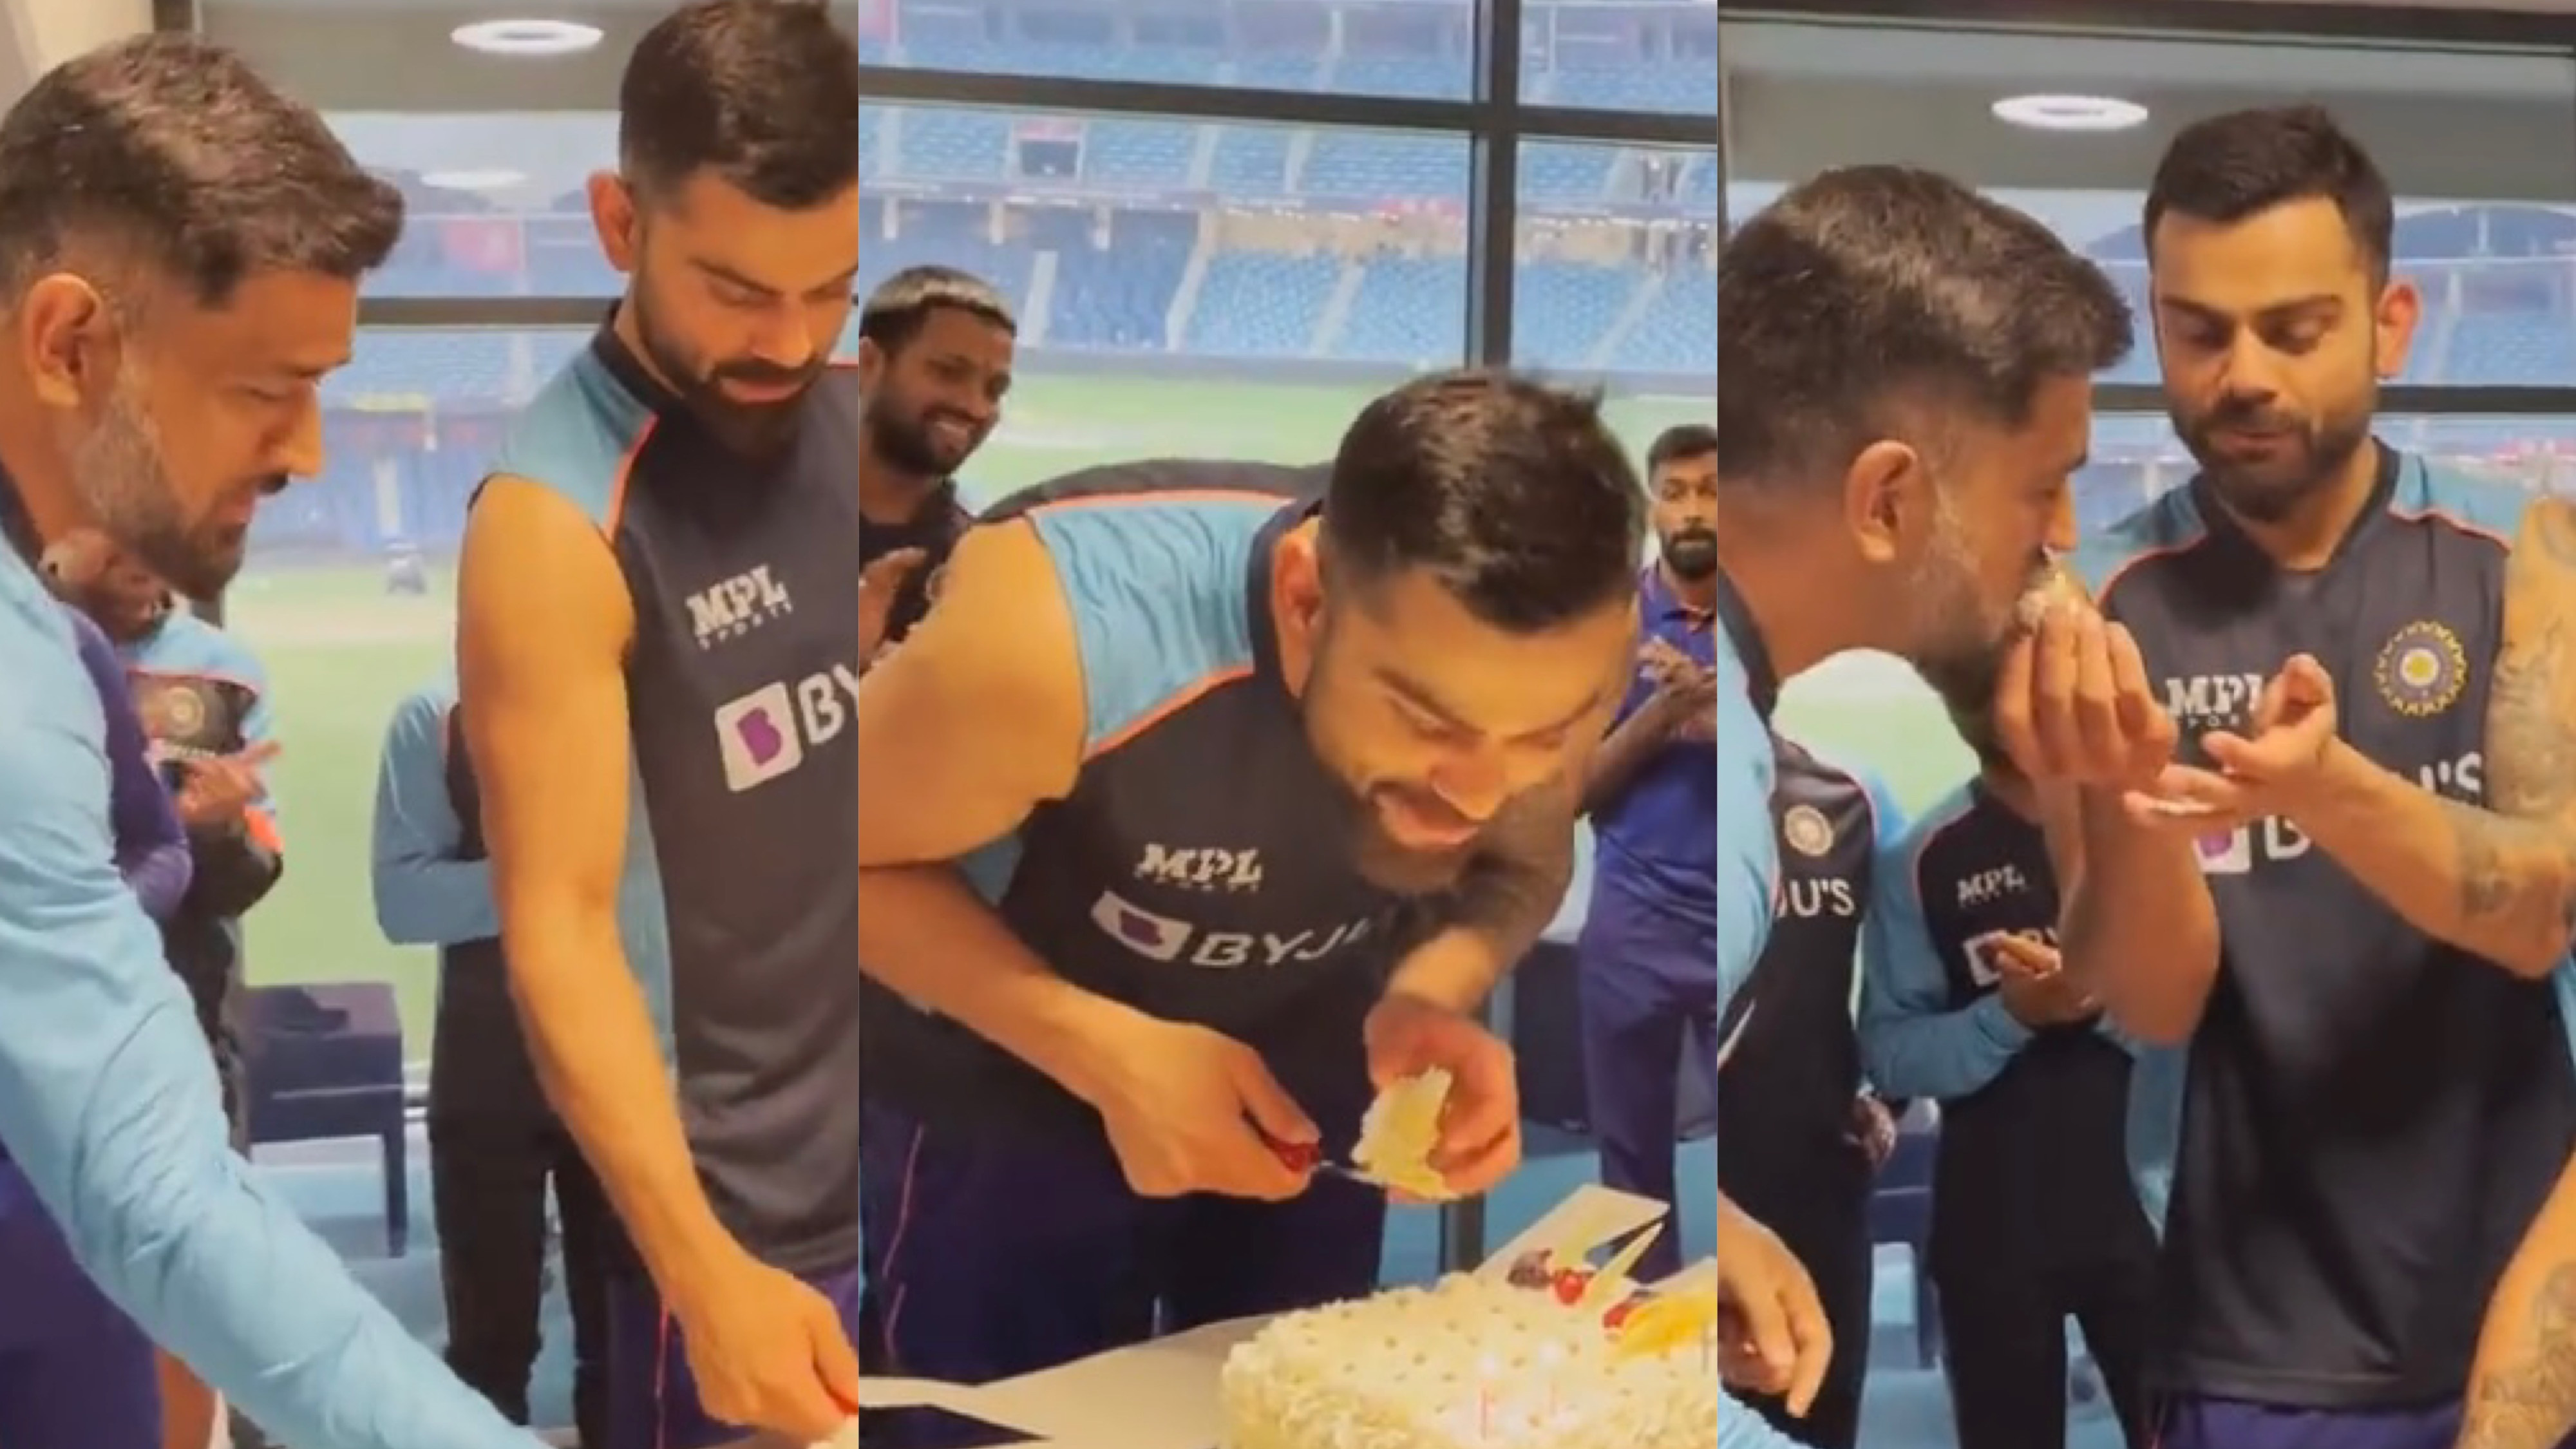 T20 World Cup 2021: WATCH - Team India celebrates Virat Kohli's 33rd birthday after thumping win